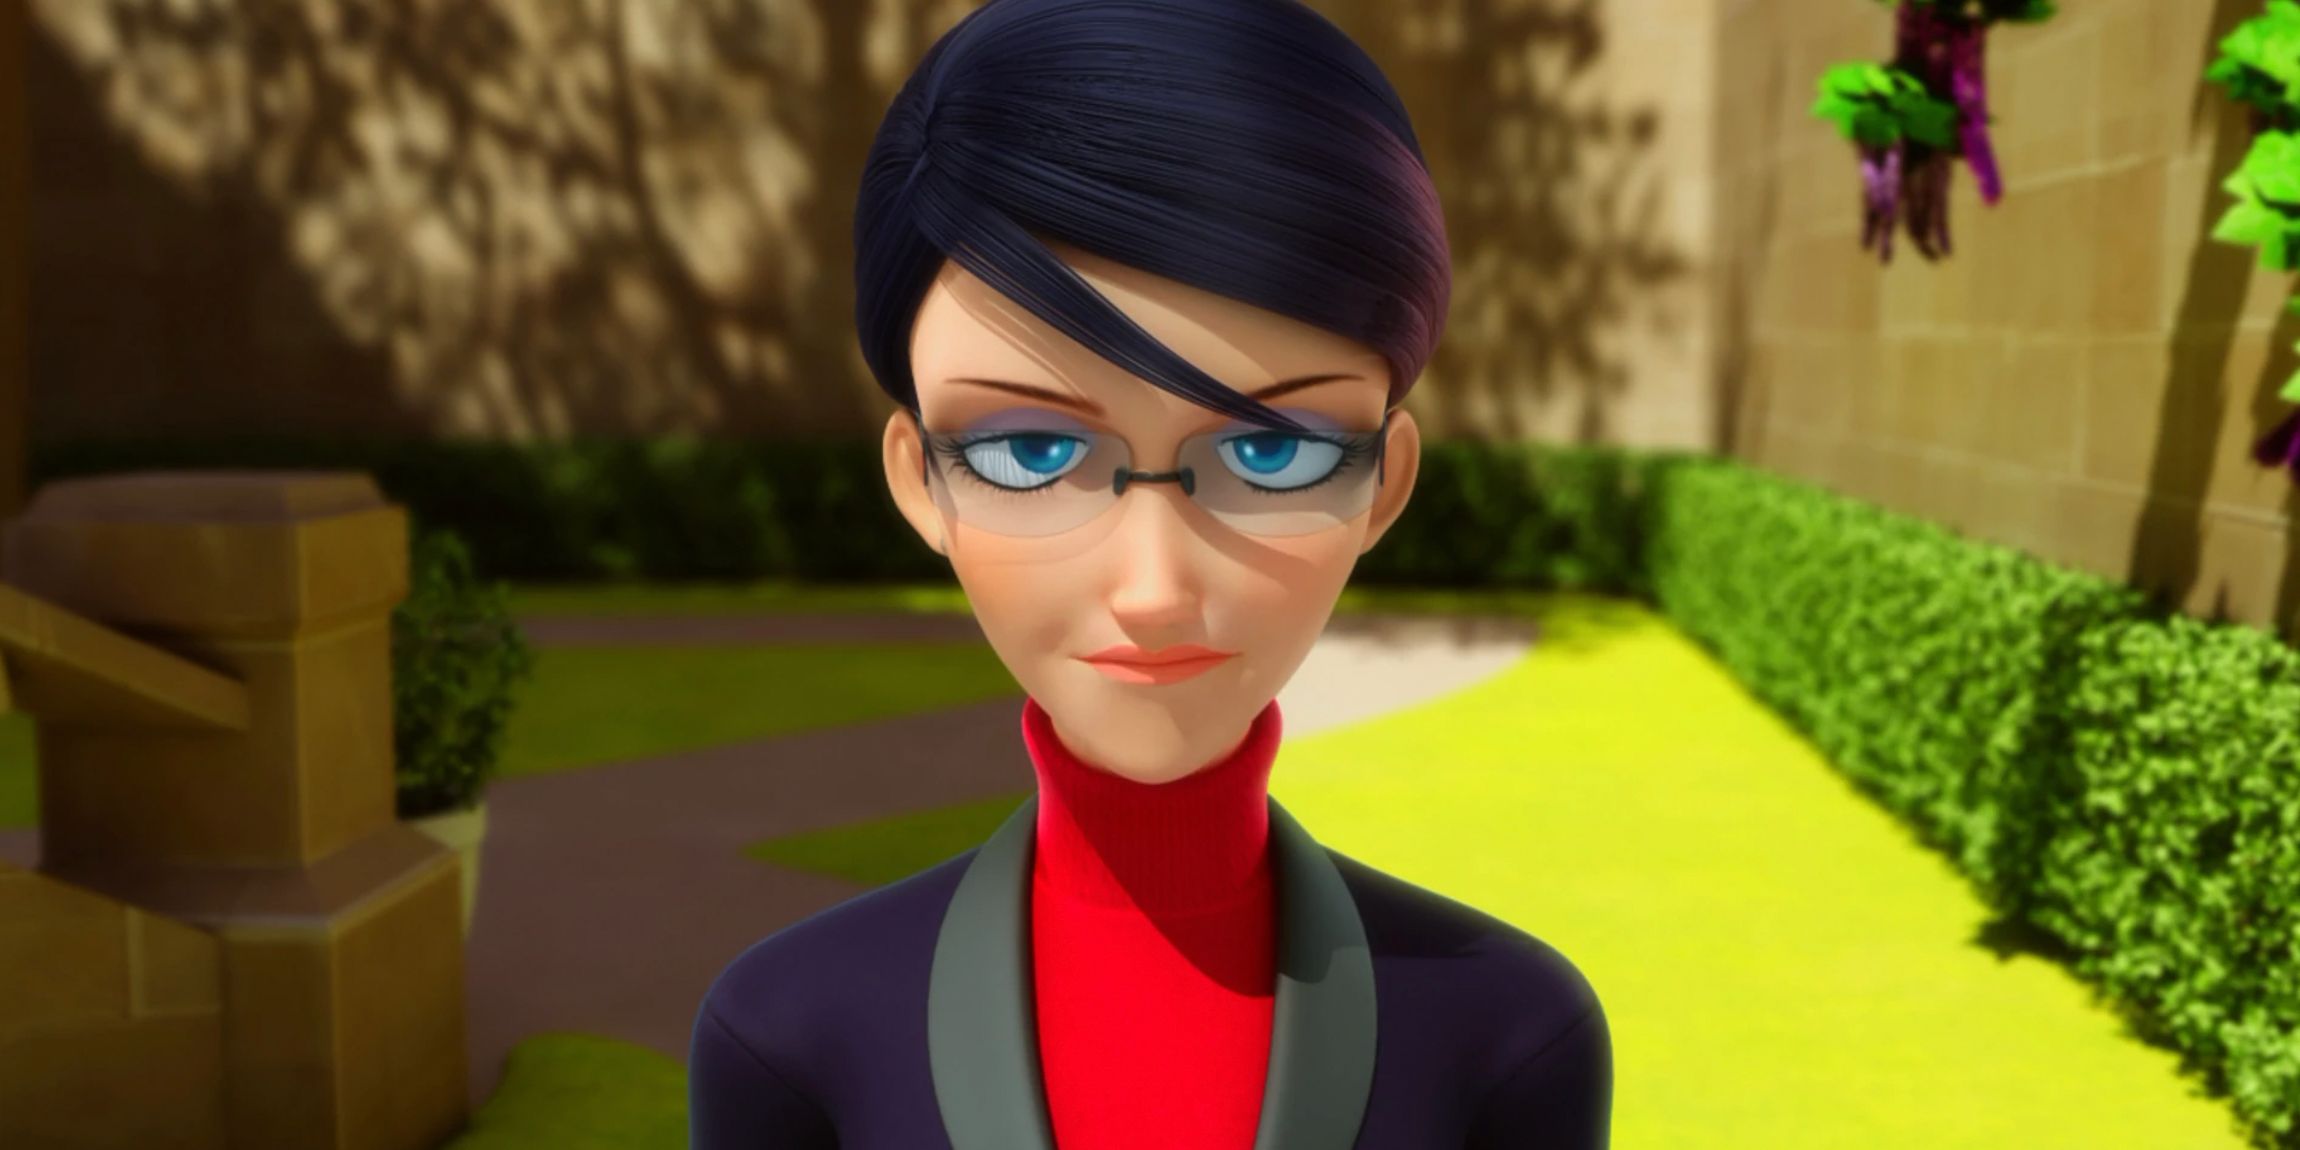 Nathalie stands in a courtyard in Miraculous Ladybug